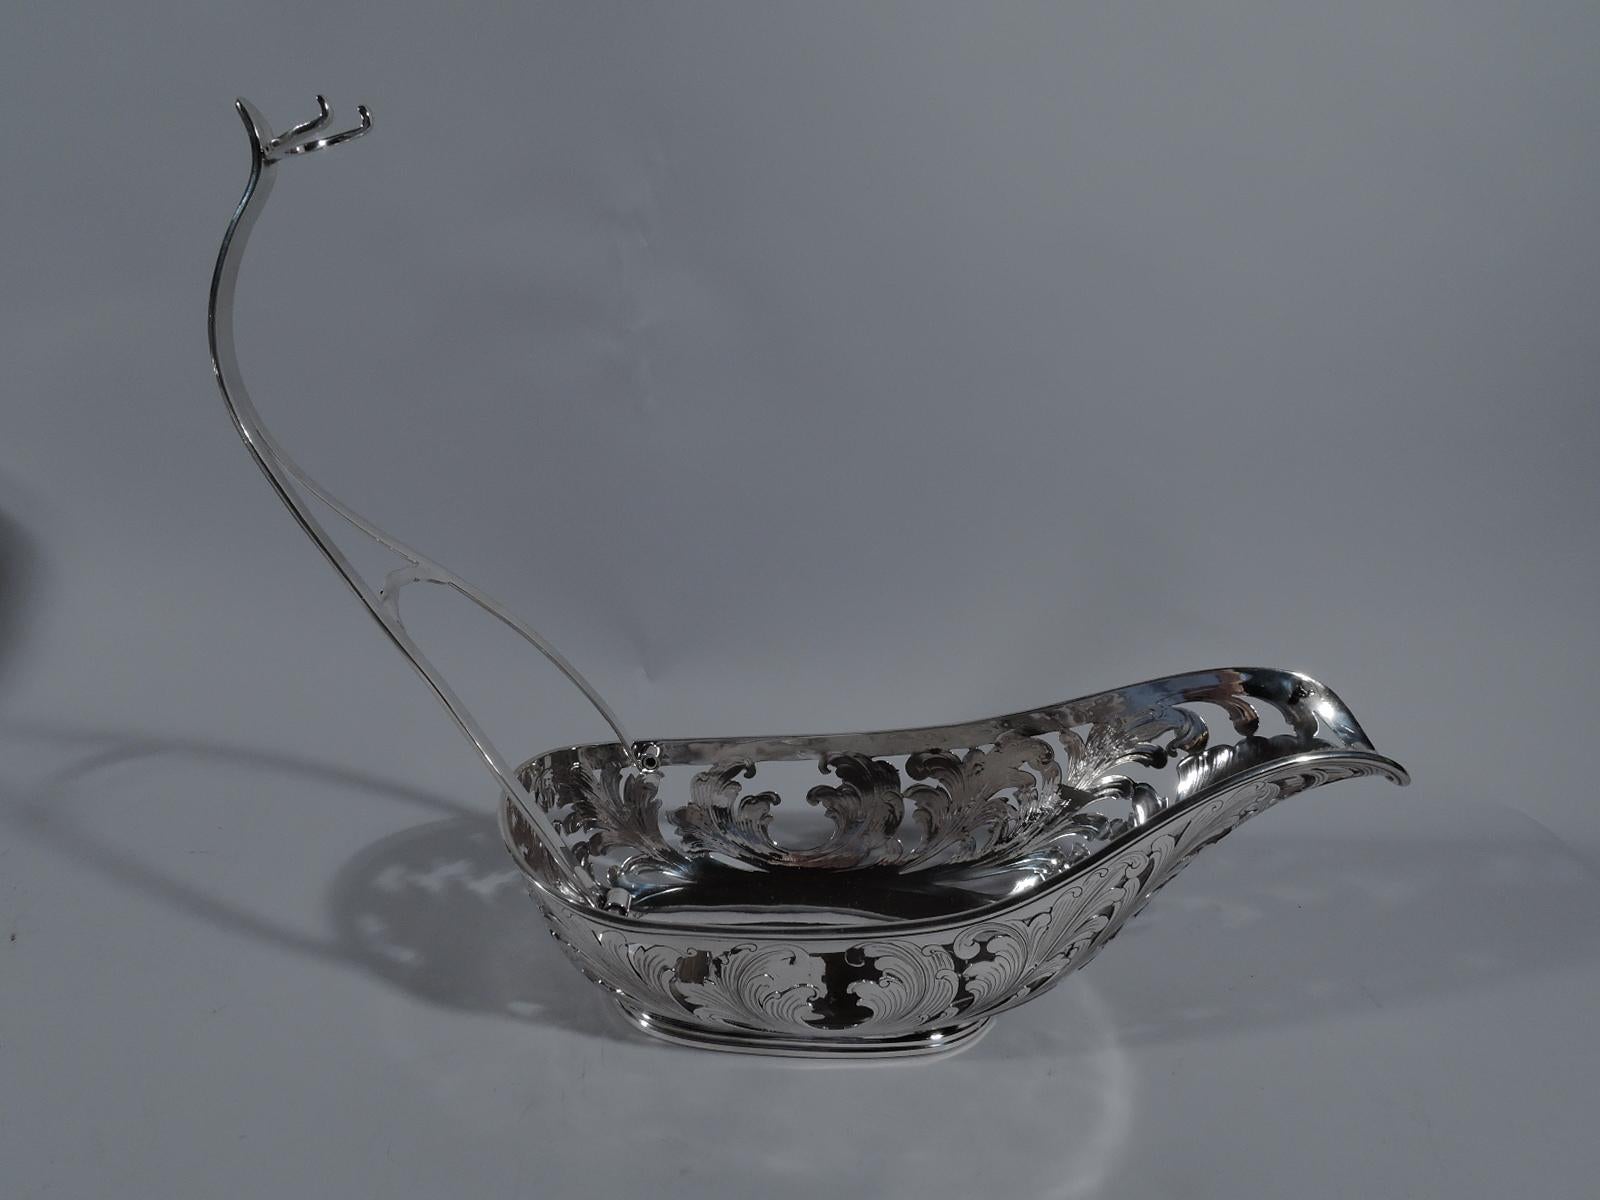 Stylish sterling silver wine cradle. Made by Buccellati in Italy. Ovoid body with solid well. Sides open with fluid, scrolling engraved leaves. Handle hinged and open with C-scroll ring for securing bottle neck. Stepped oval foot. Marked “Buccellati